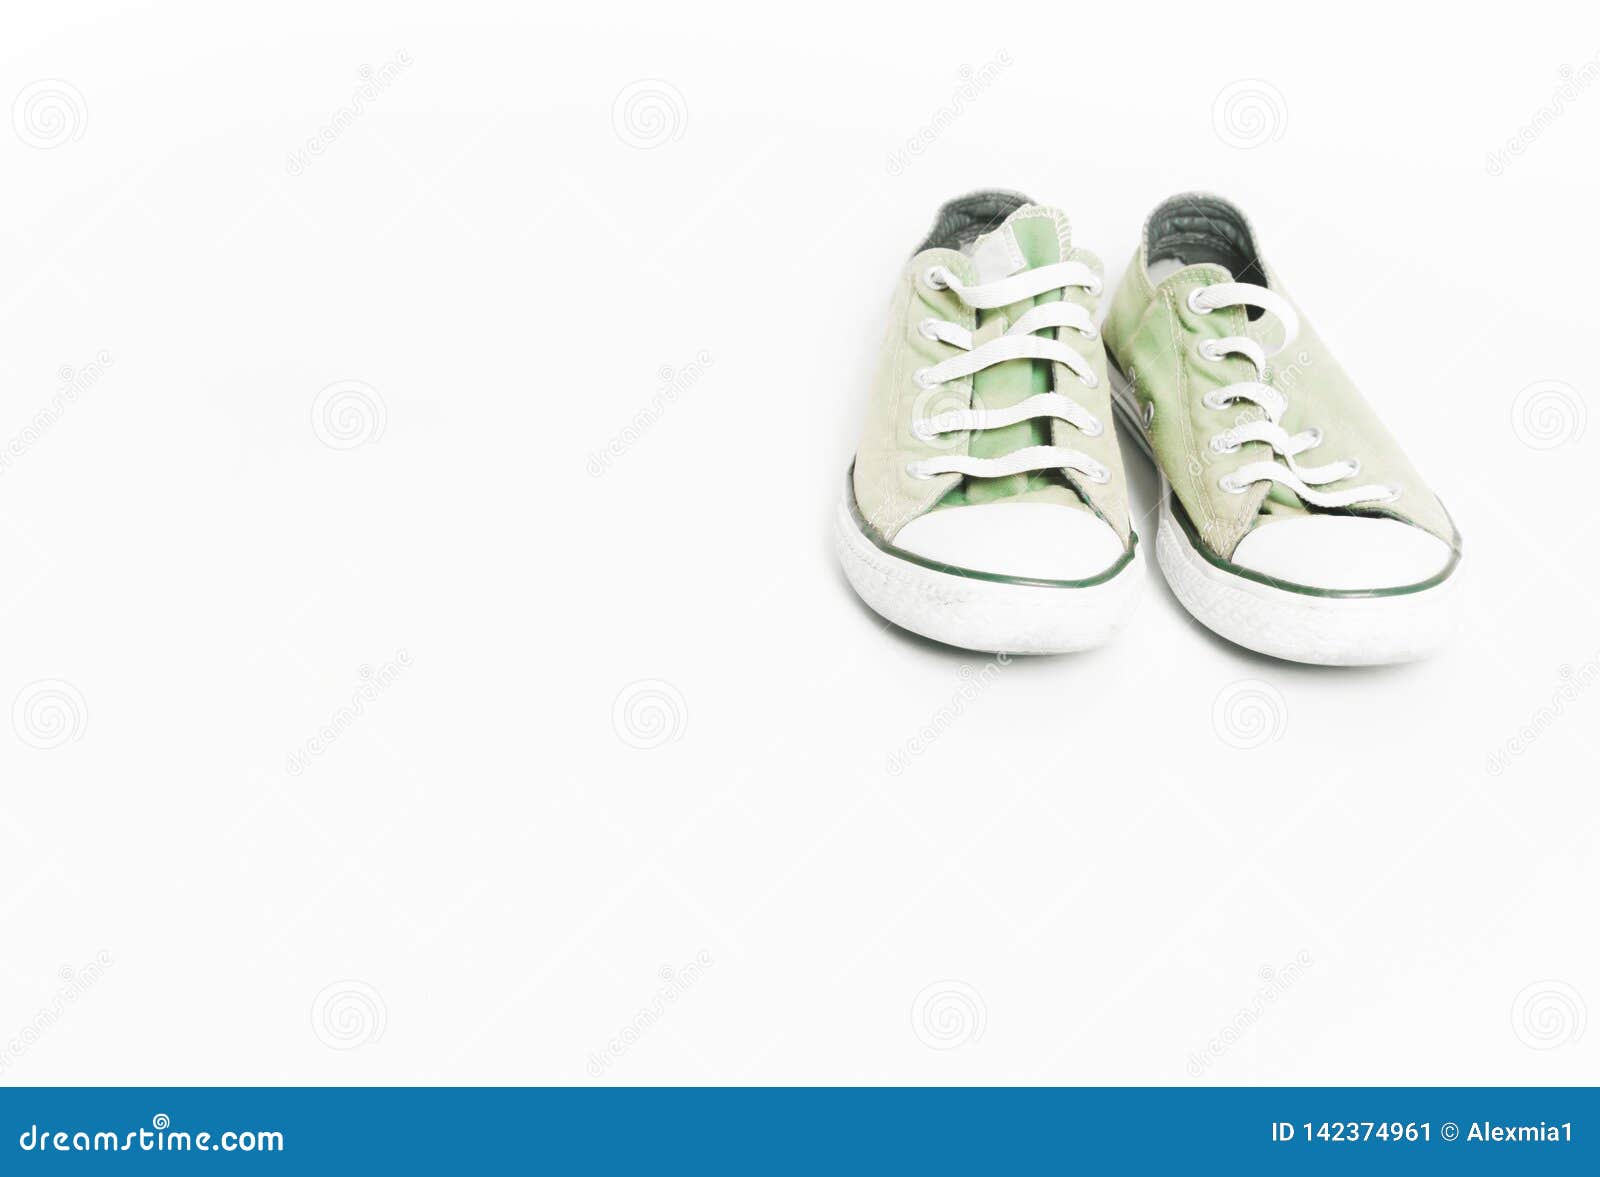 Vintage Old Green Sneakers, Shoes Stock Image - Image of chuck ...